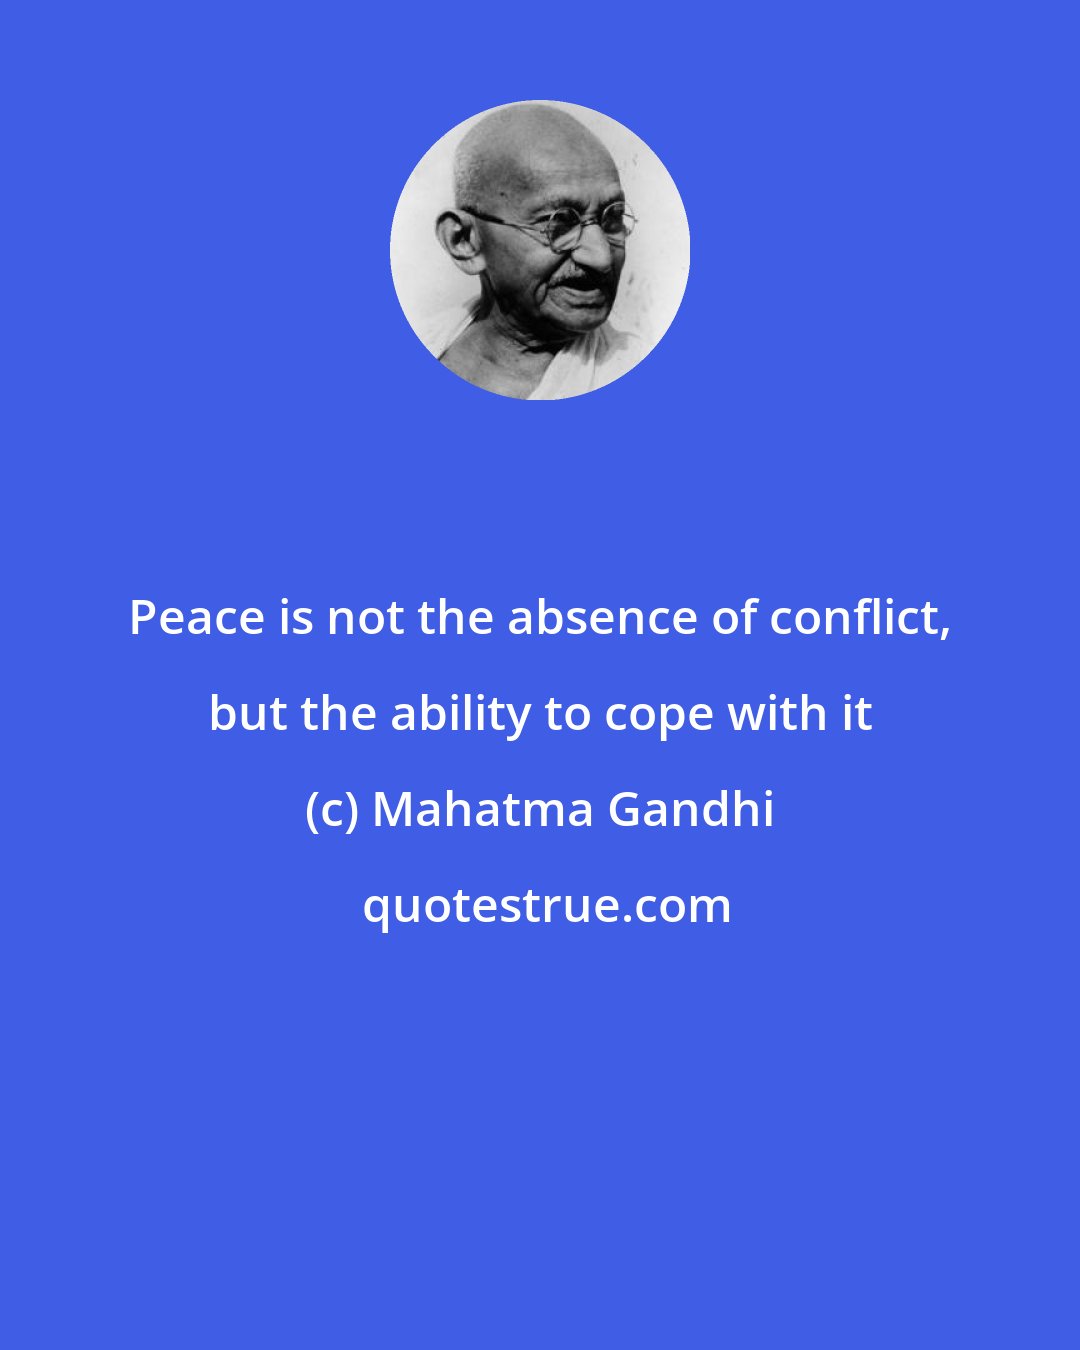 Mahatma Gandhi: Peace is not the absence of conflict, but the ability to cope with it